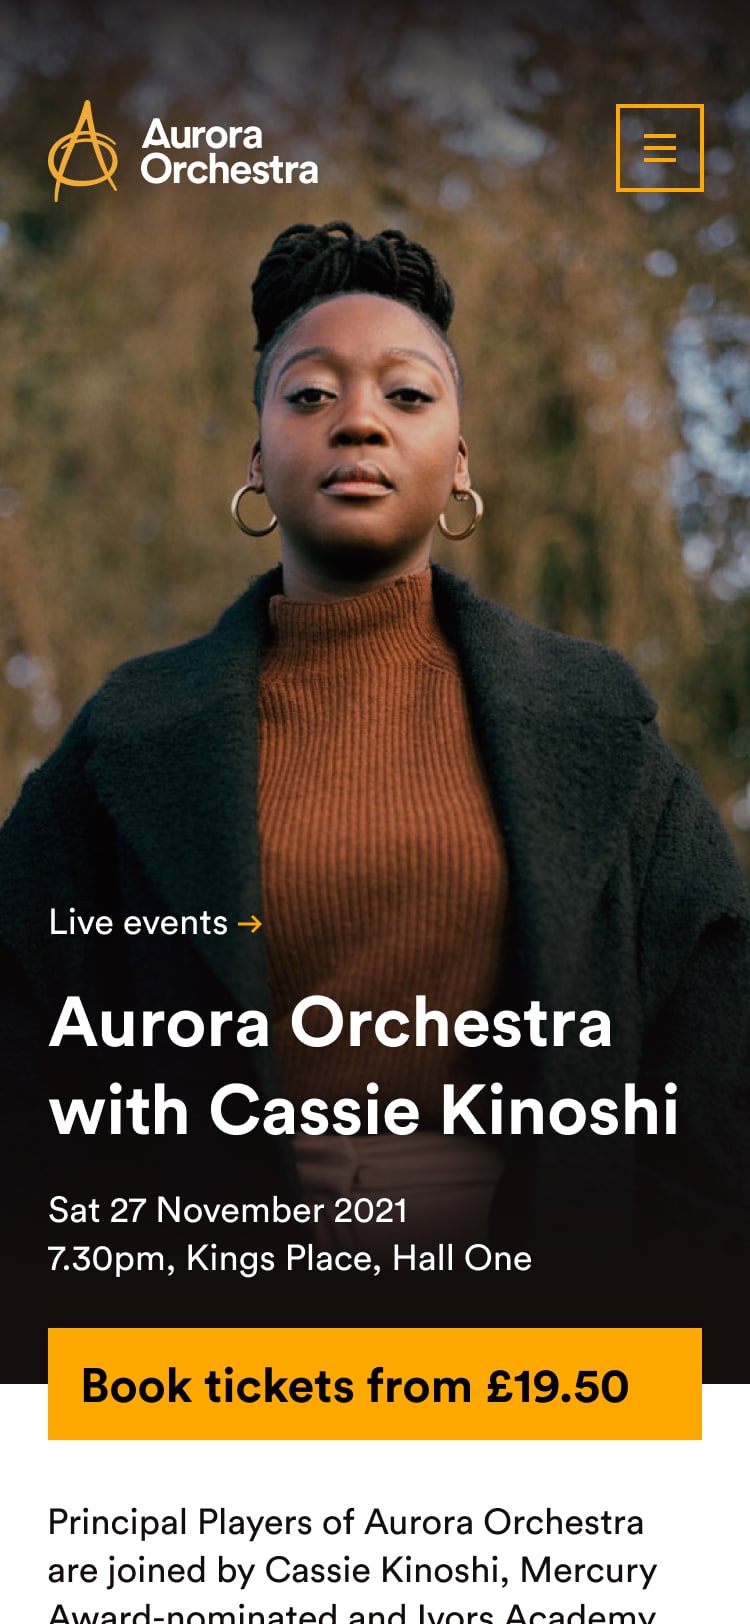 An event page from the Aurora site on a smartphone. There's a cover image for the event, overlaid with the event title and a button to buy tickets, followed by some text about the event.